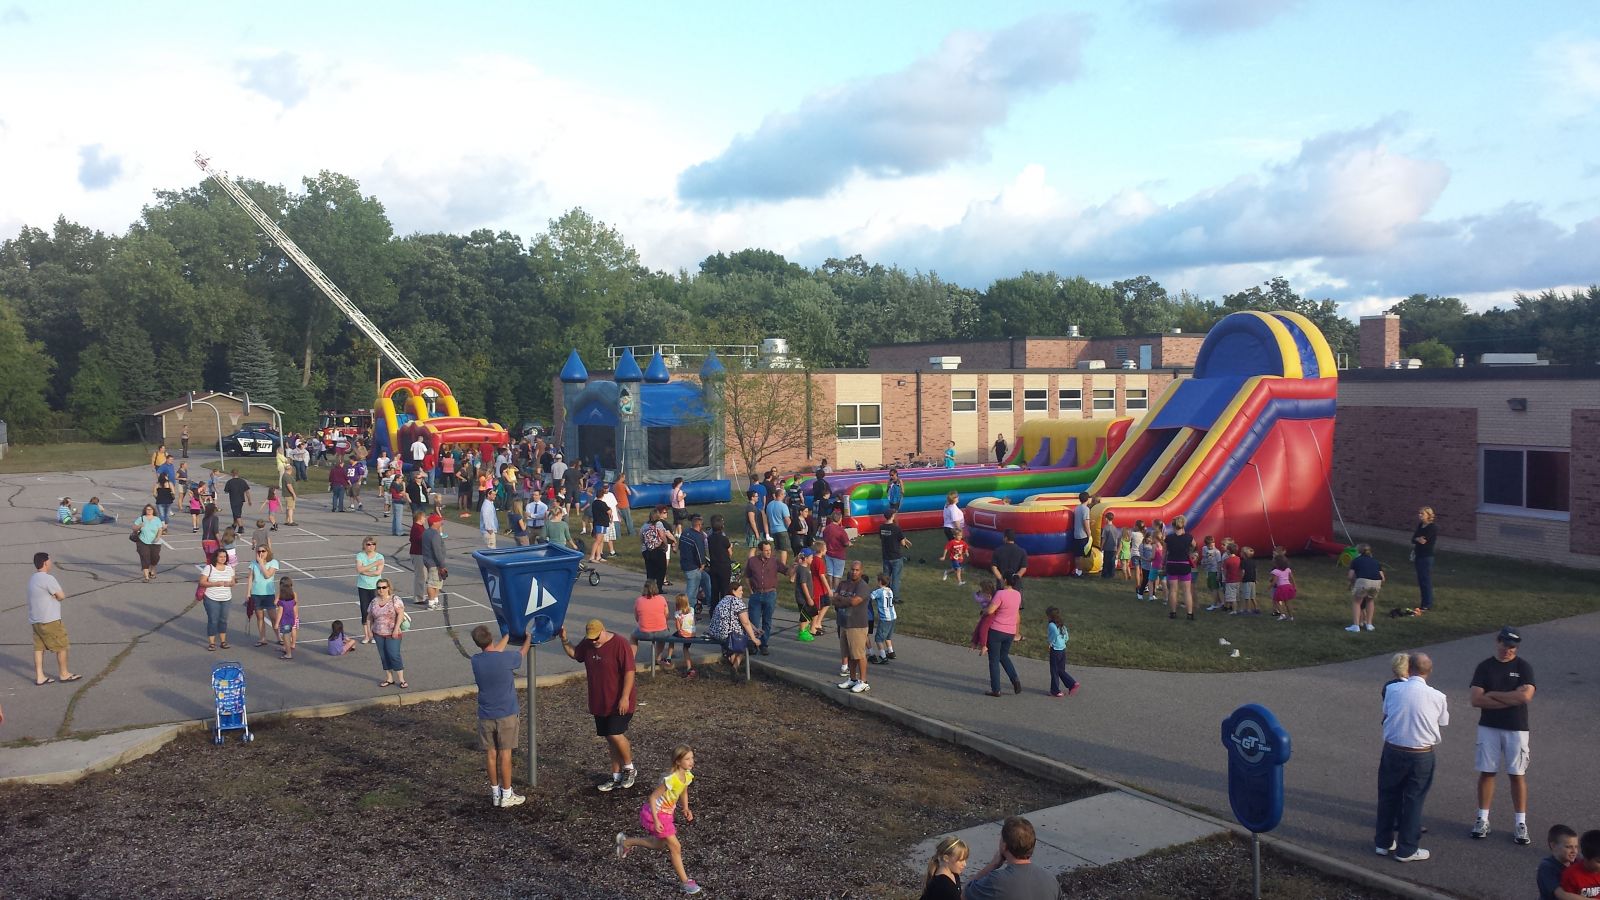 School carnival with giant slide, bounce house, obstacle course, and other inflatables